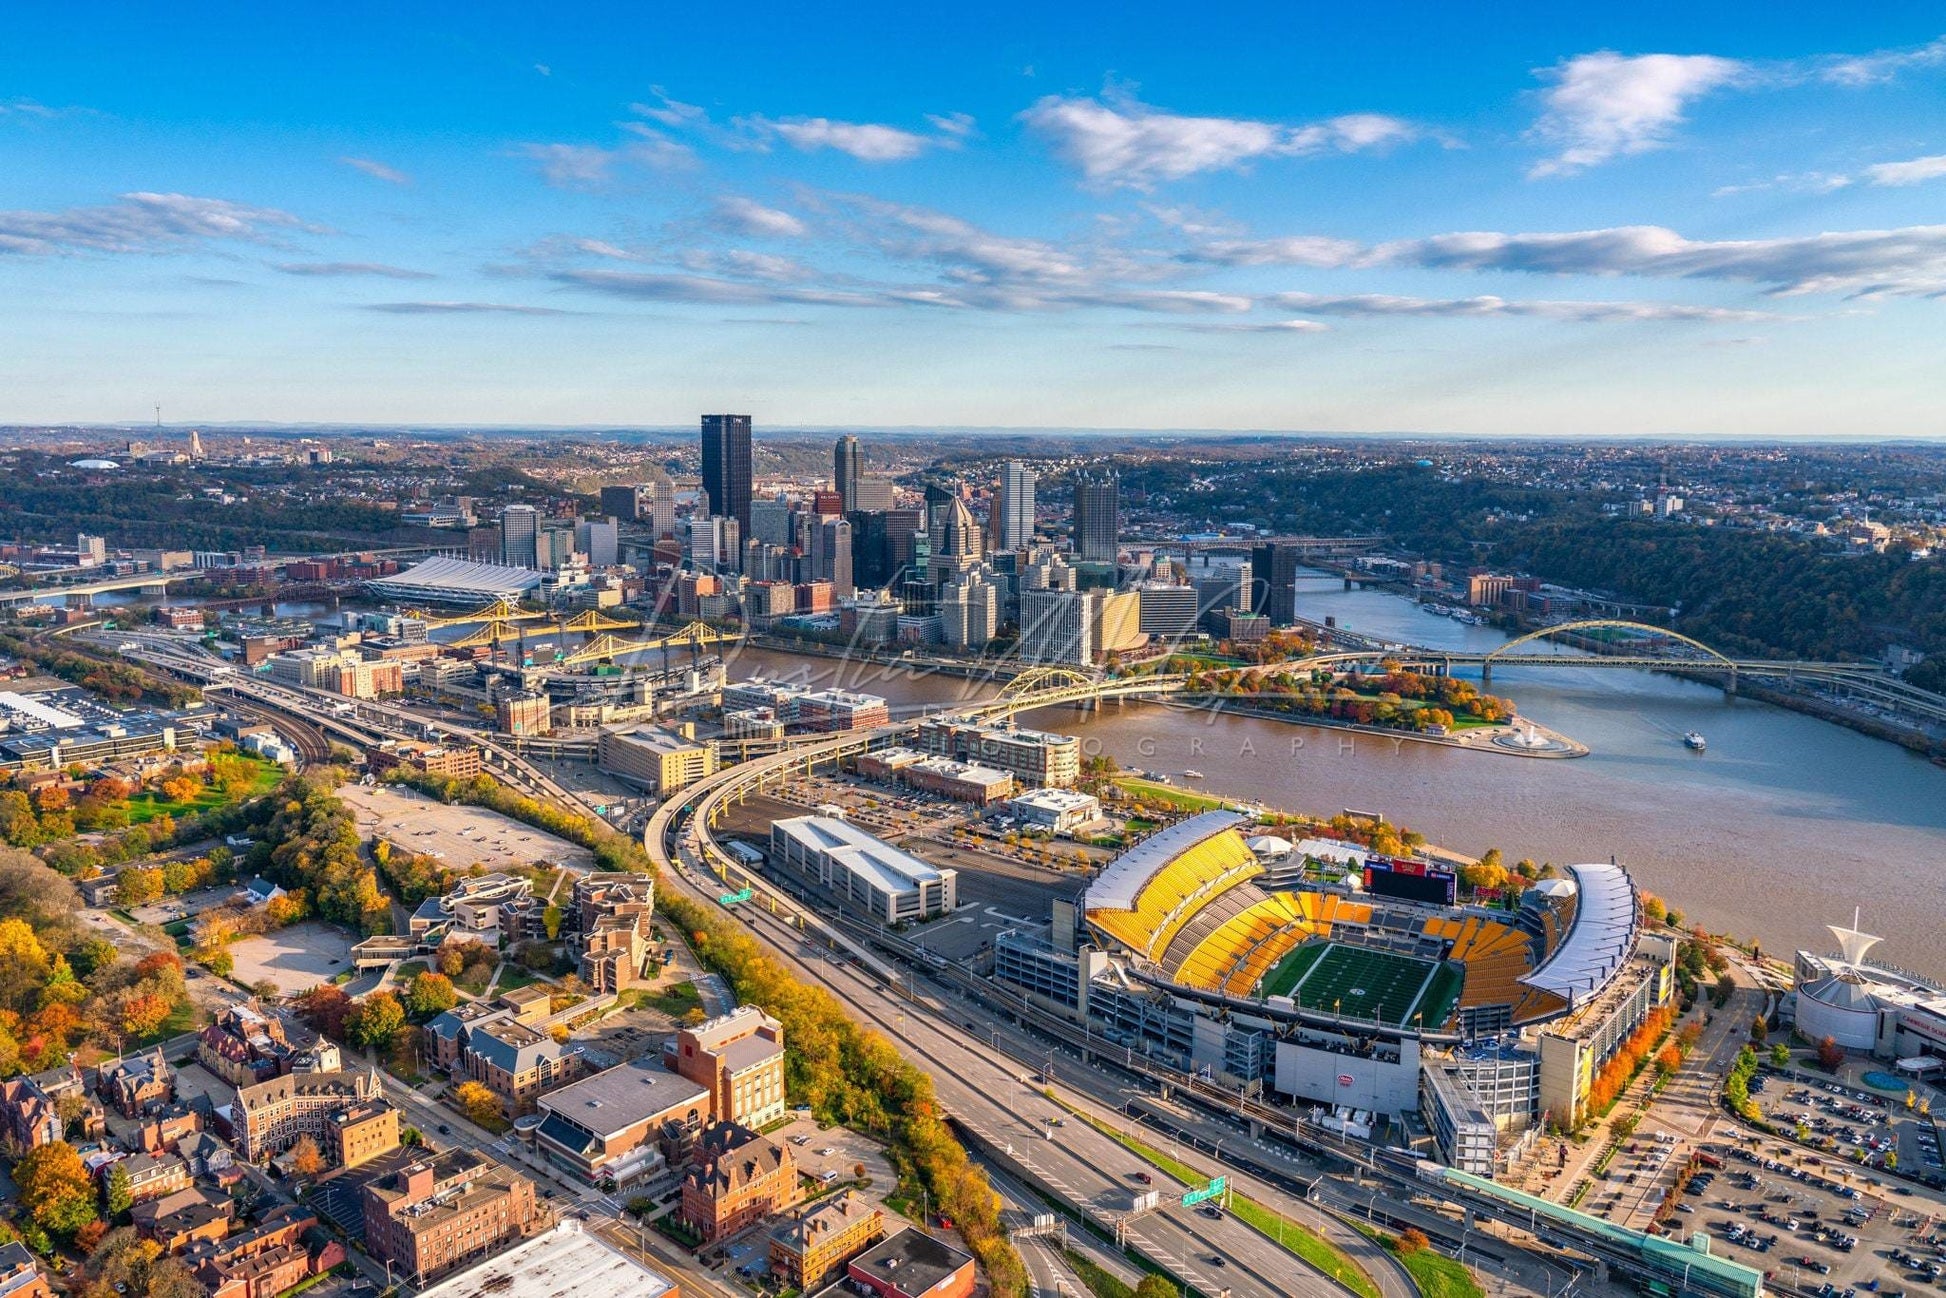 Aerial Photo Of Heinz Field And The Pittsburgh Skyline